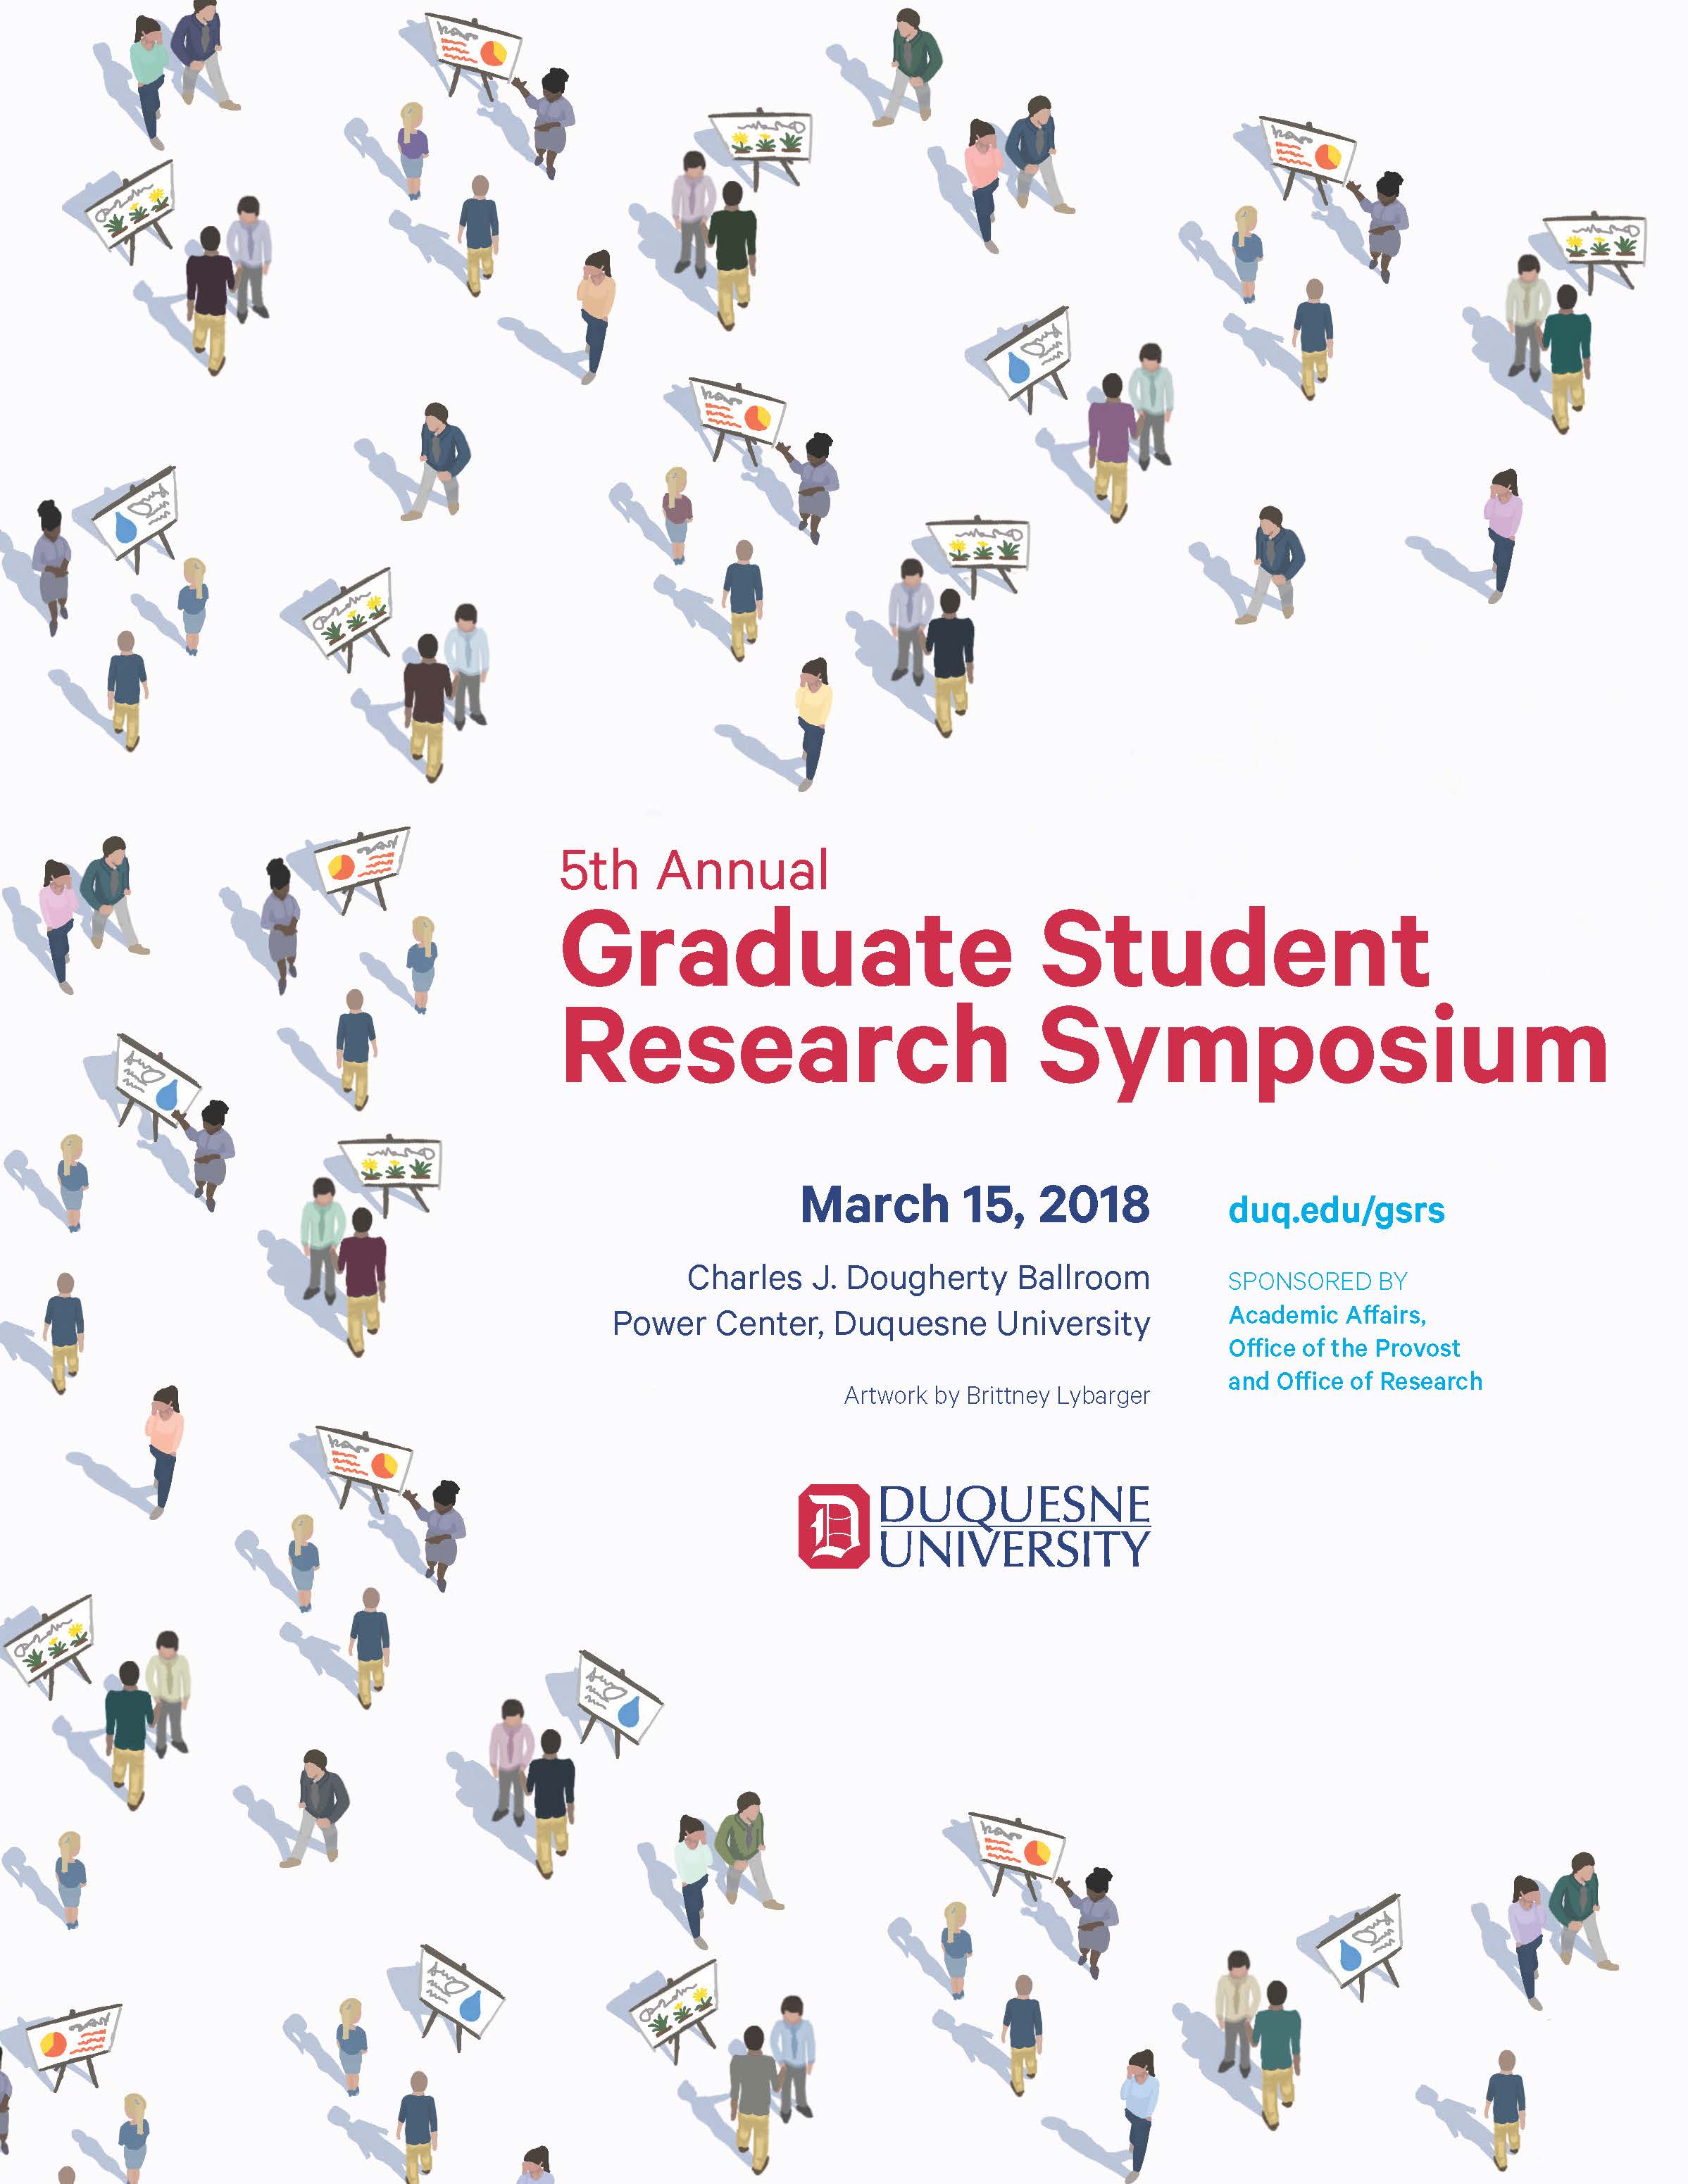 The 5th Annual Graduate Student Research Symposium